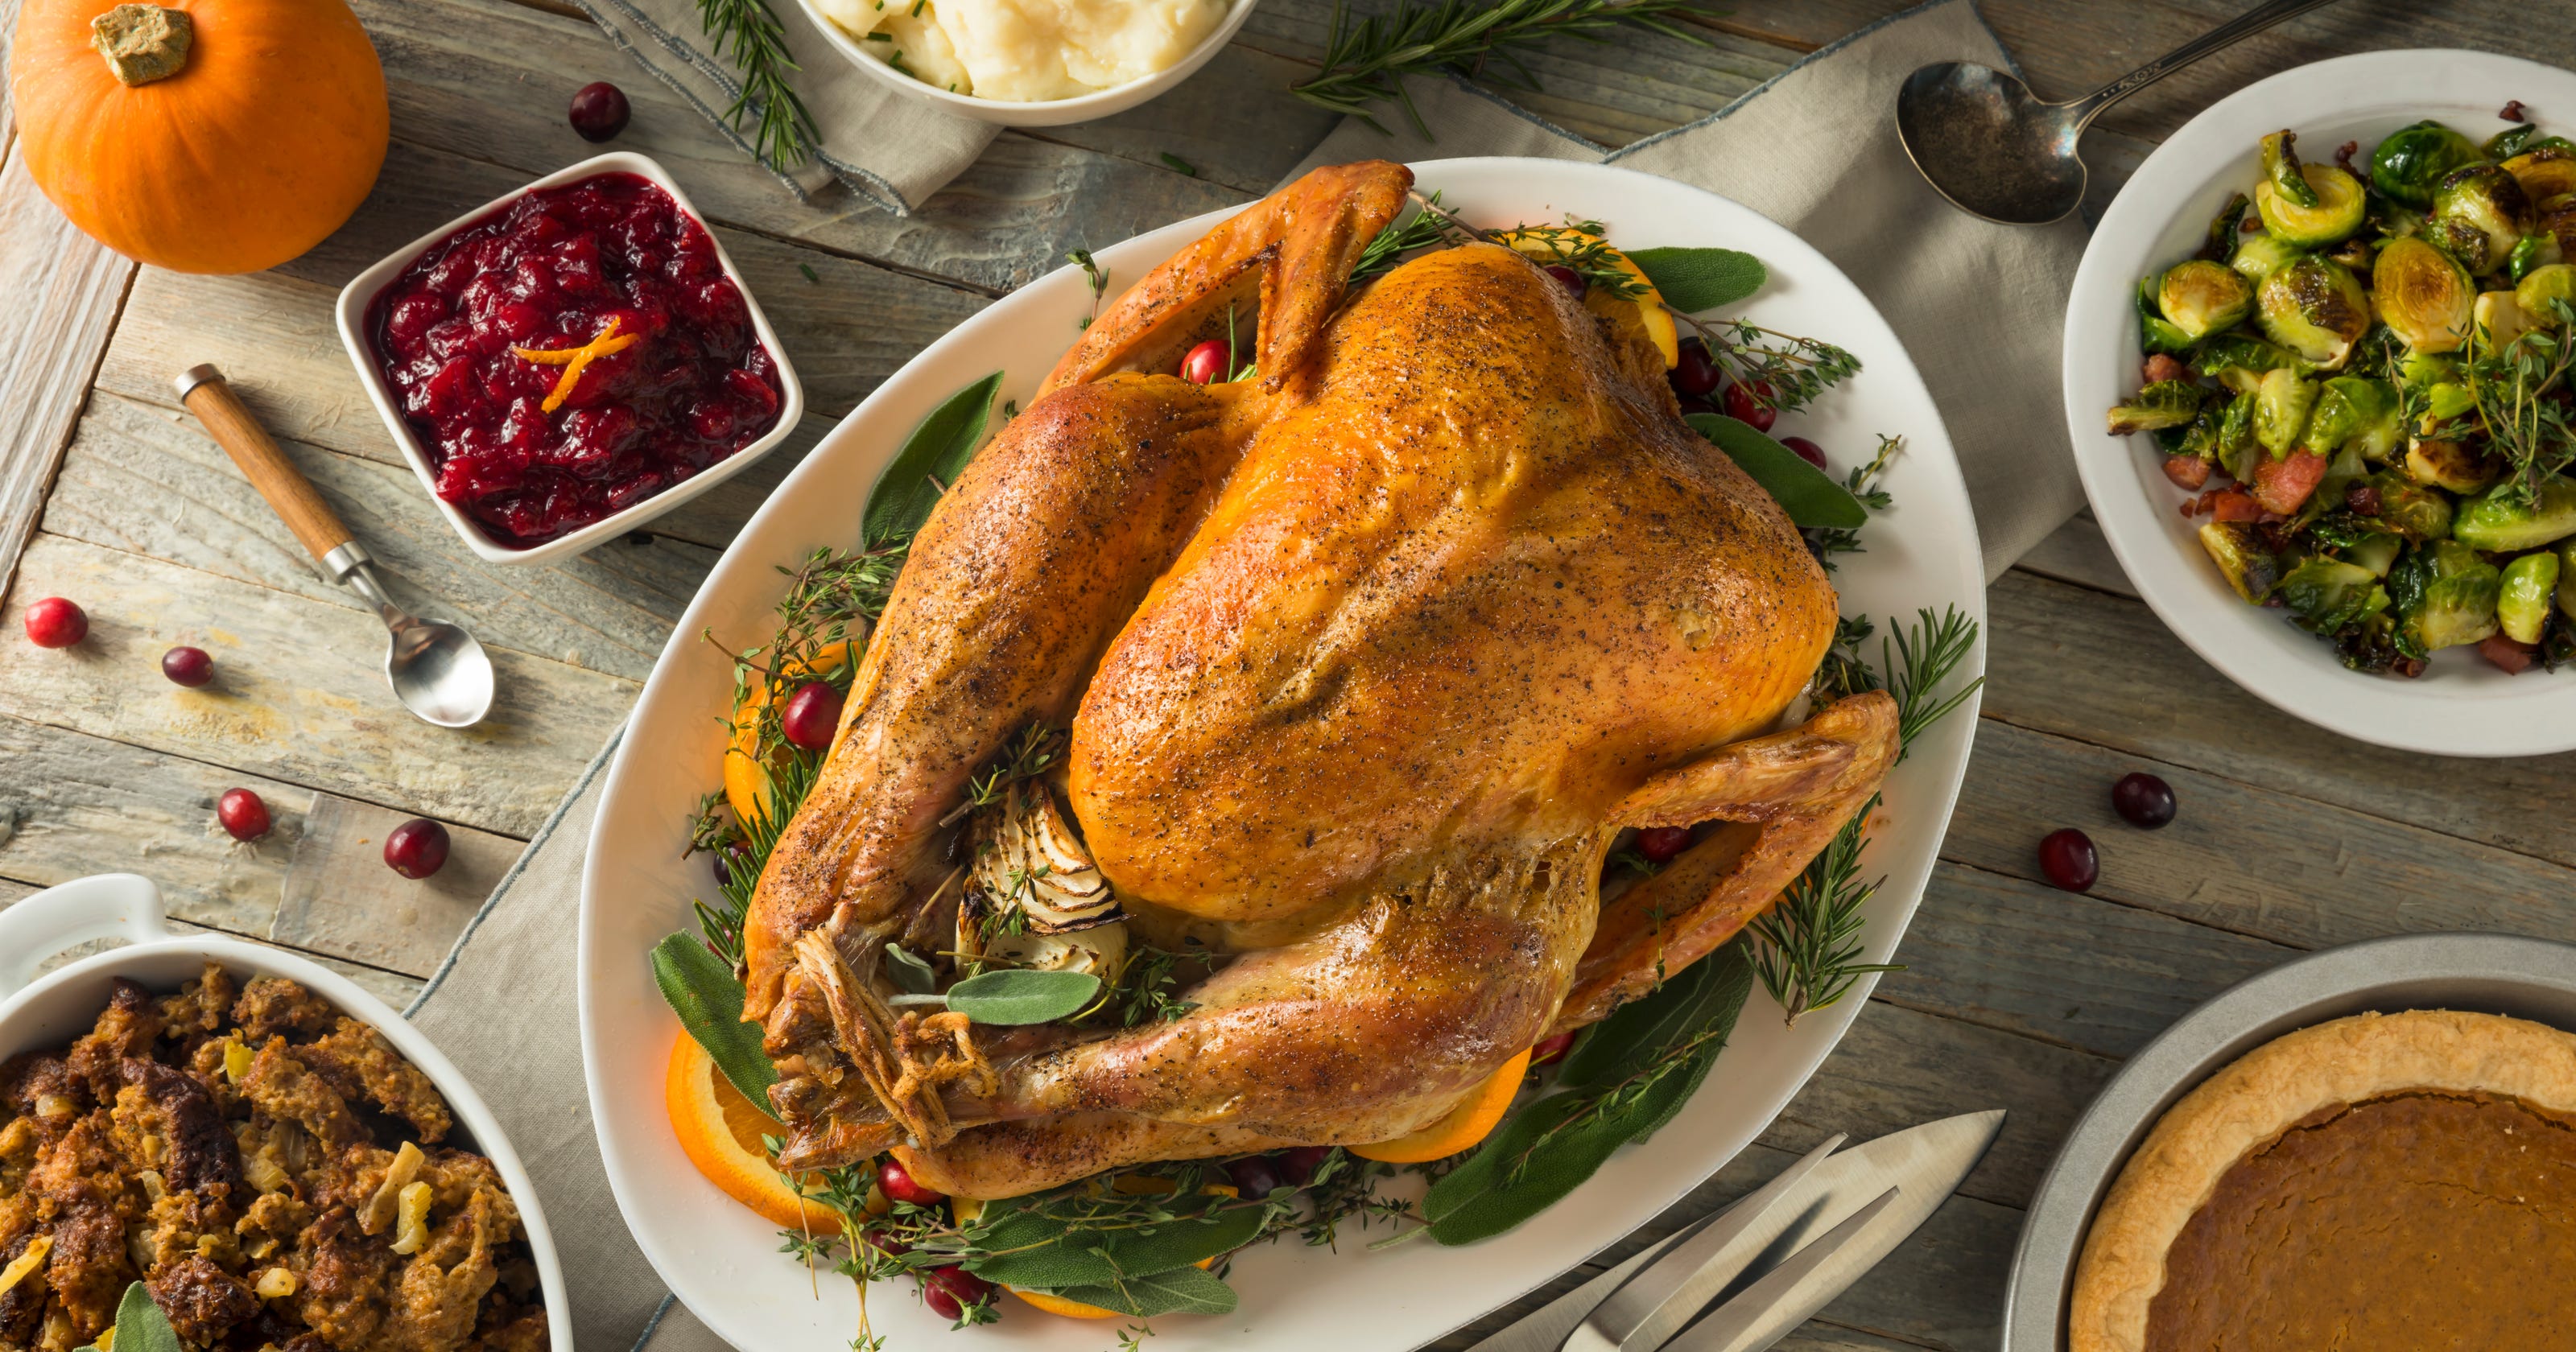 Average Thanksgiving dinner costs a bit less than last year